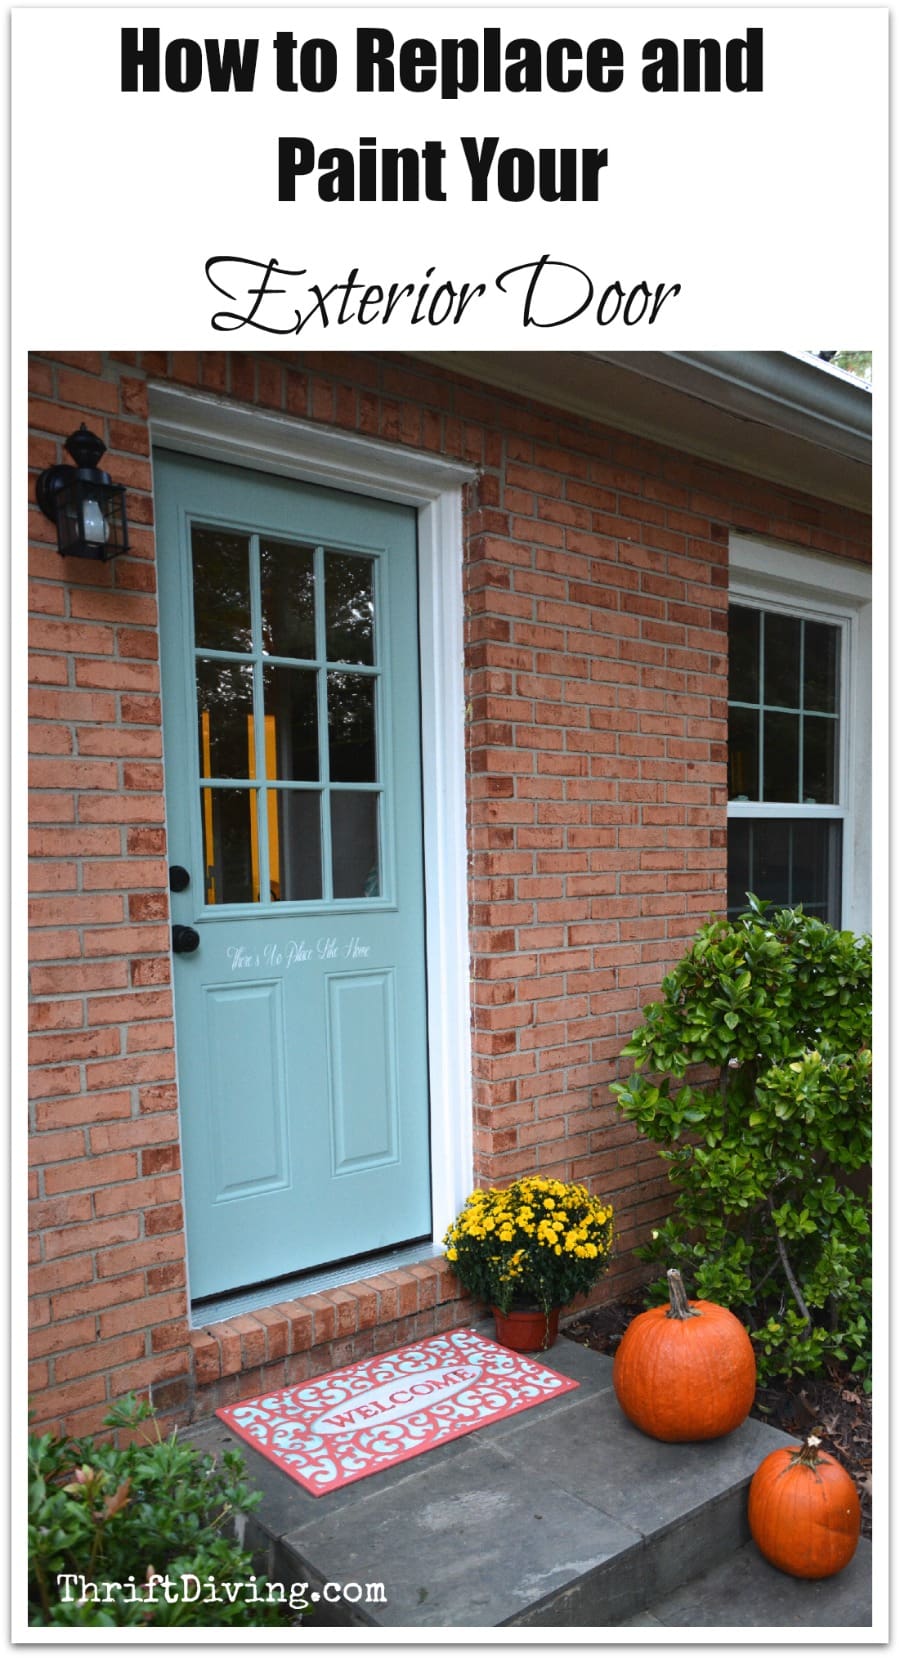 How to Install an Exterior Door and Paint It With Exterior Door Paint